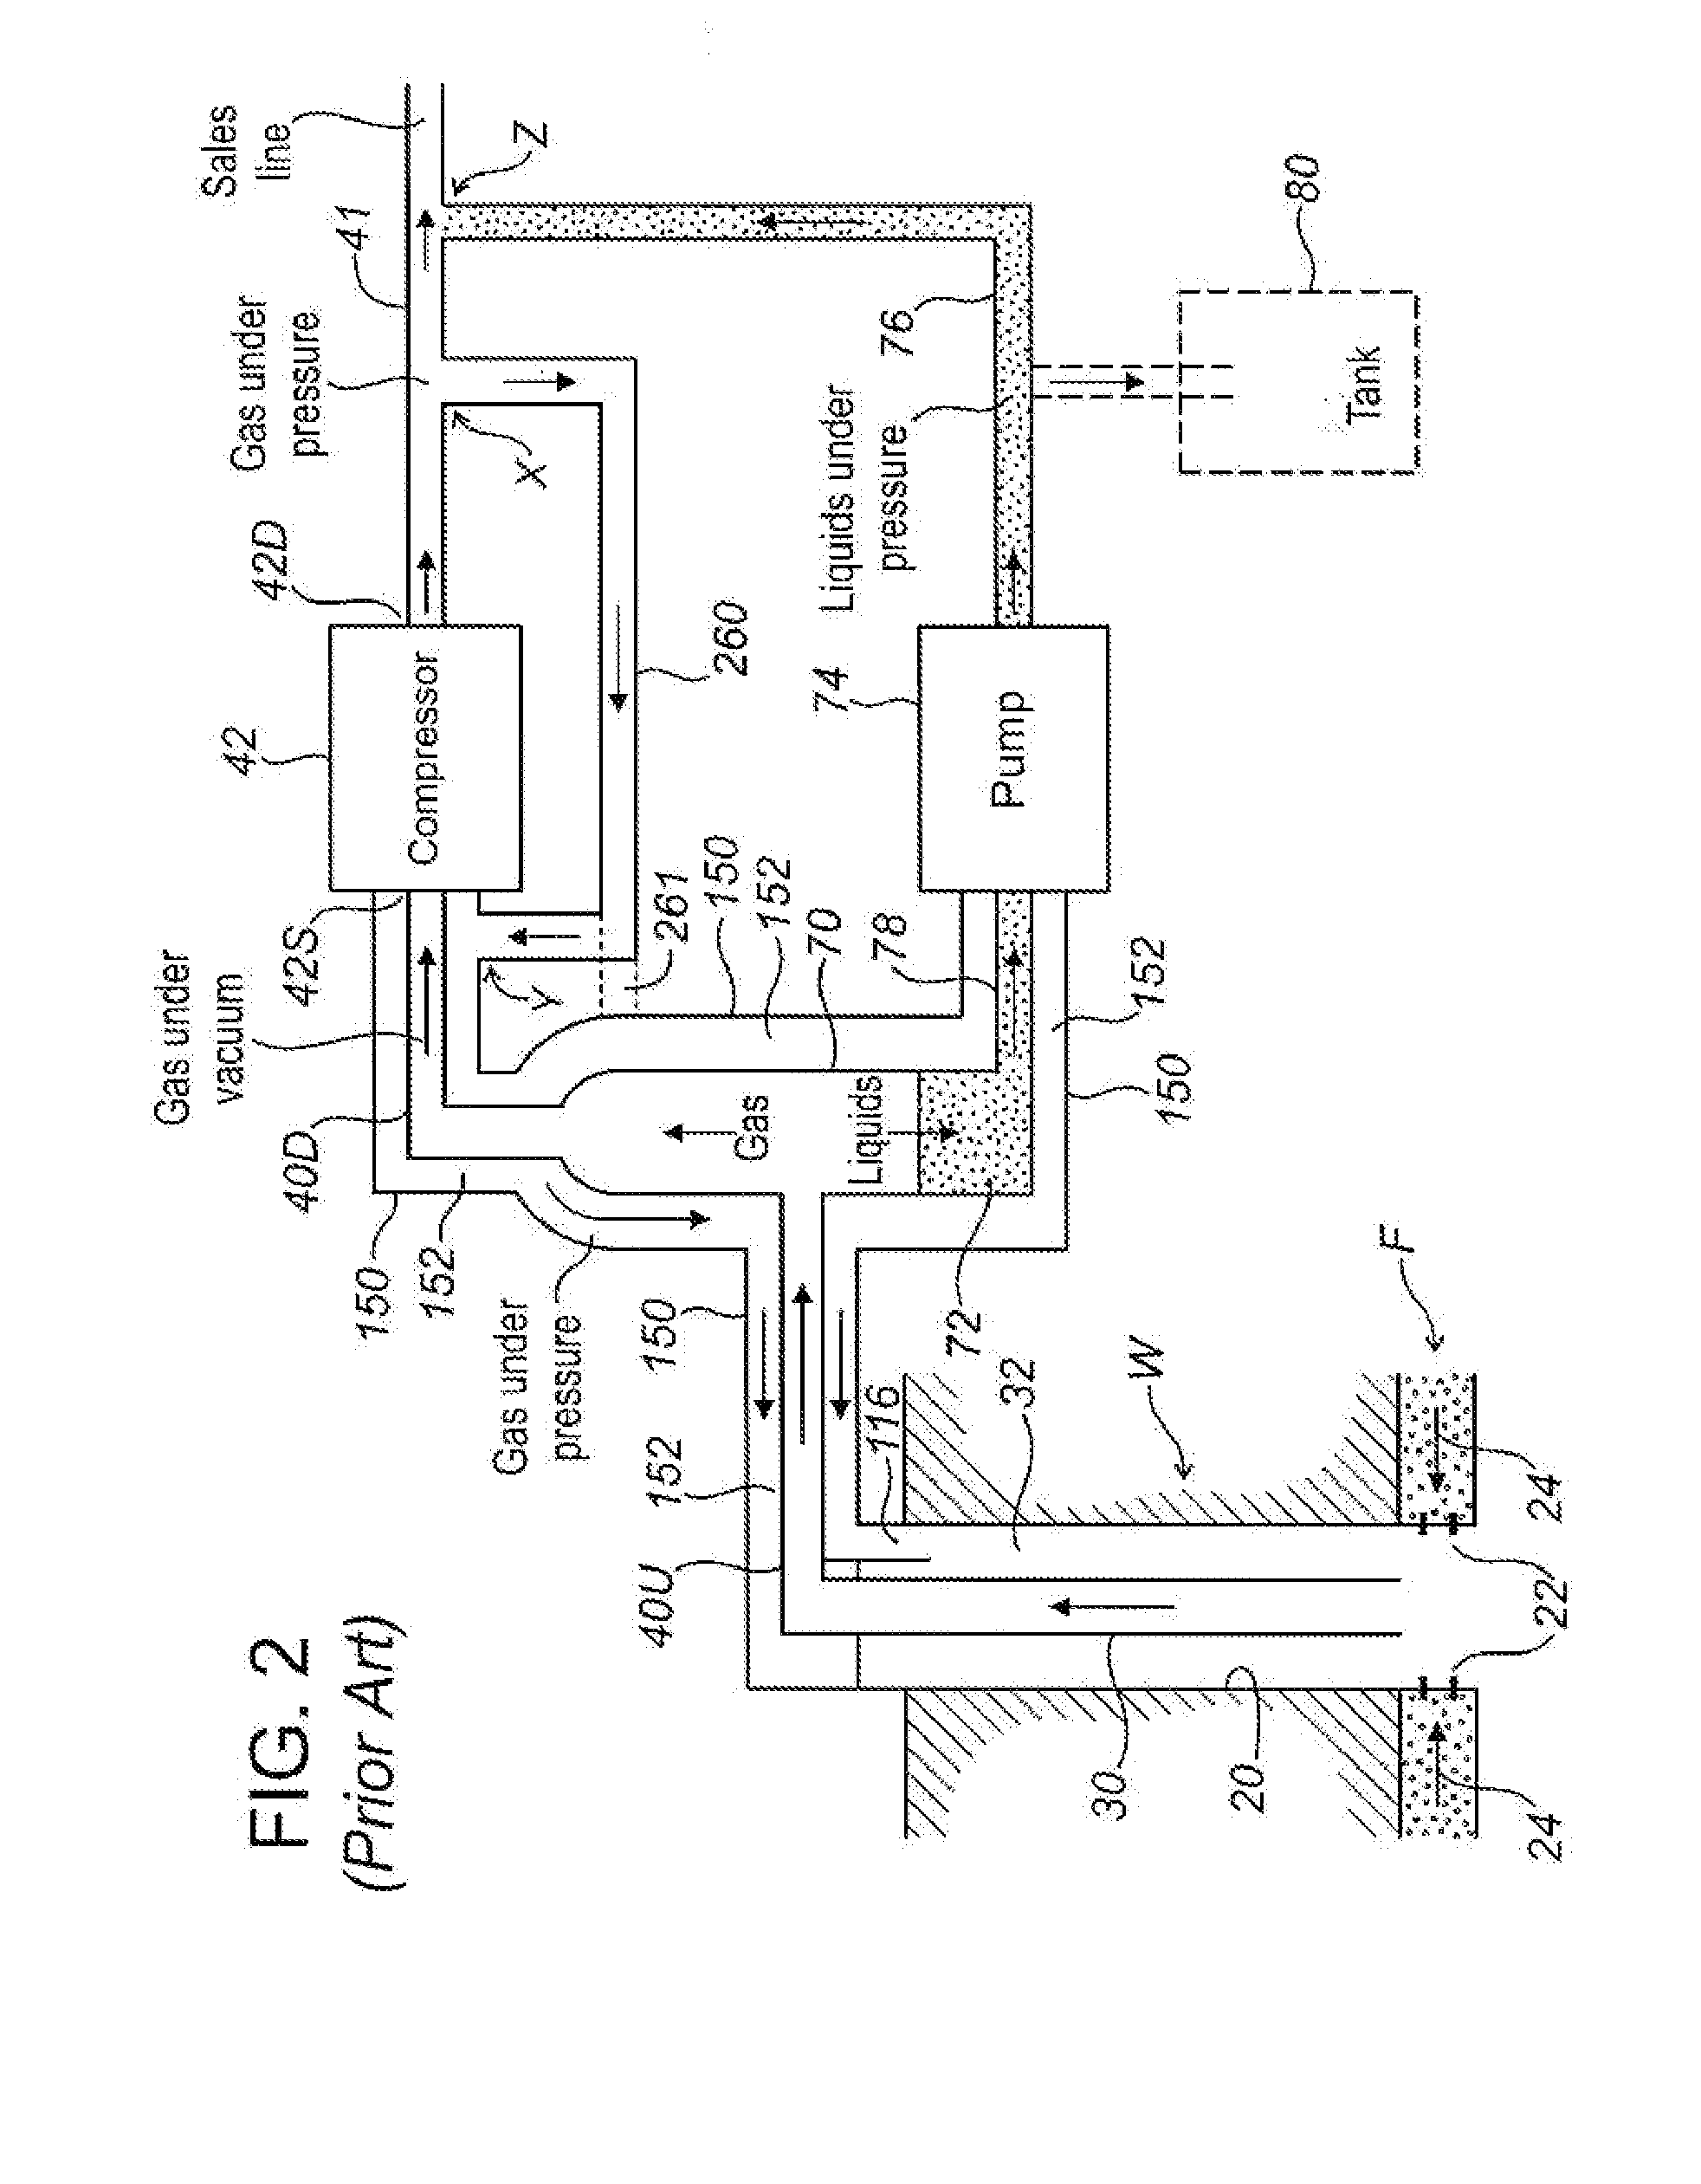 Control logic method and system for optimizing natural gas production